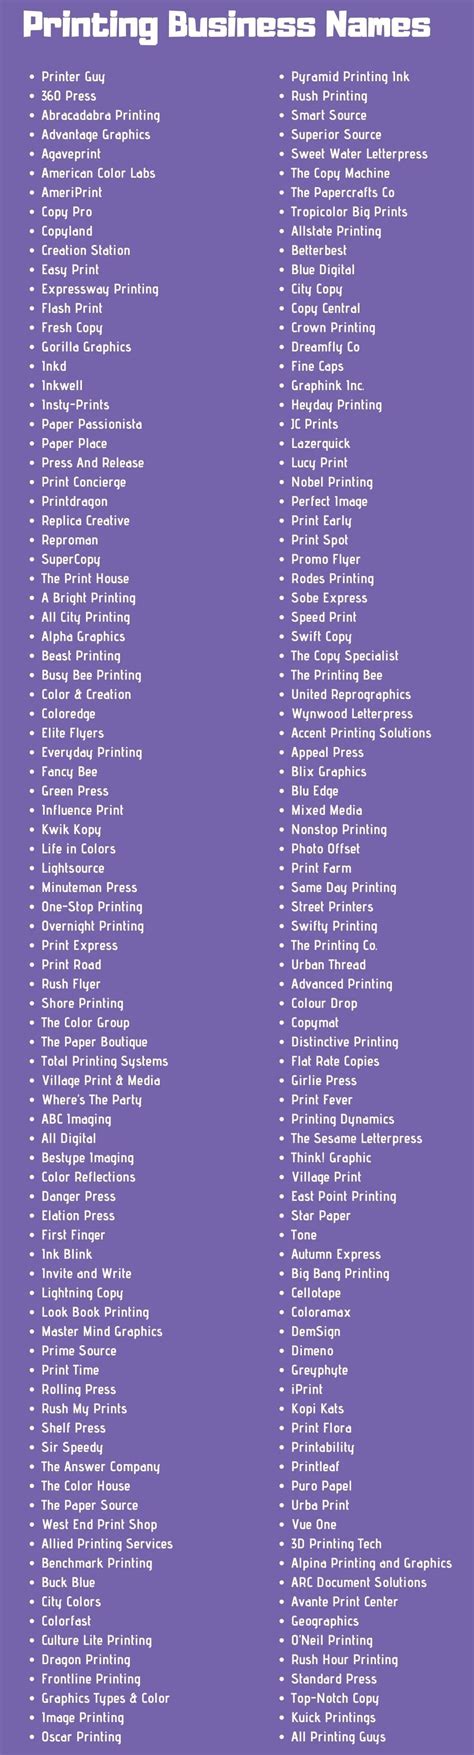 creative business names list cute business names catchy business